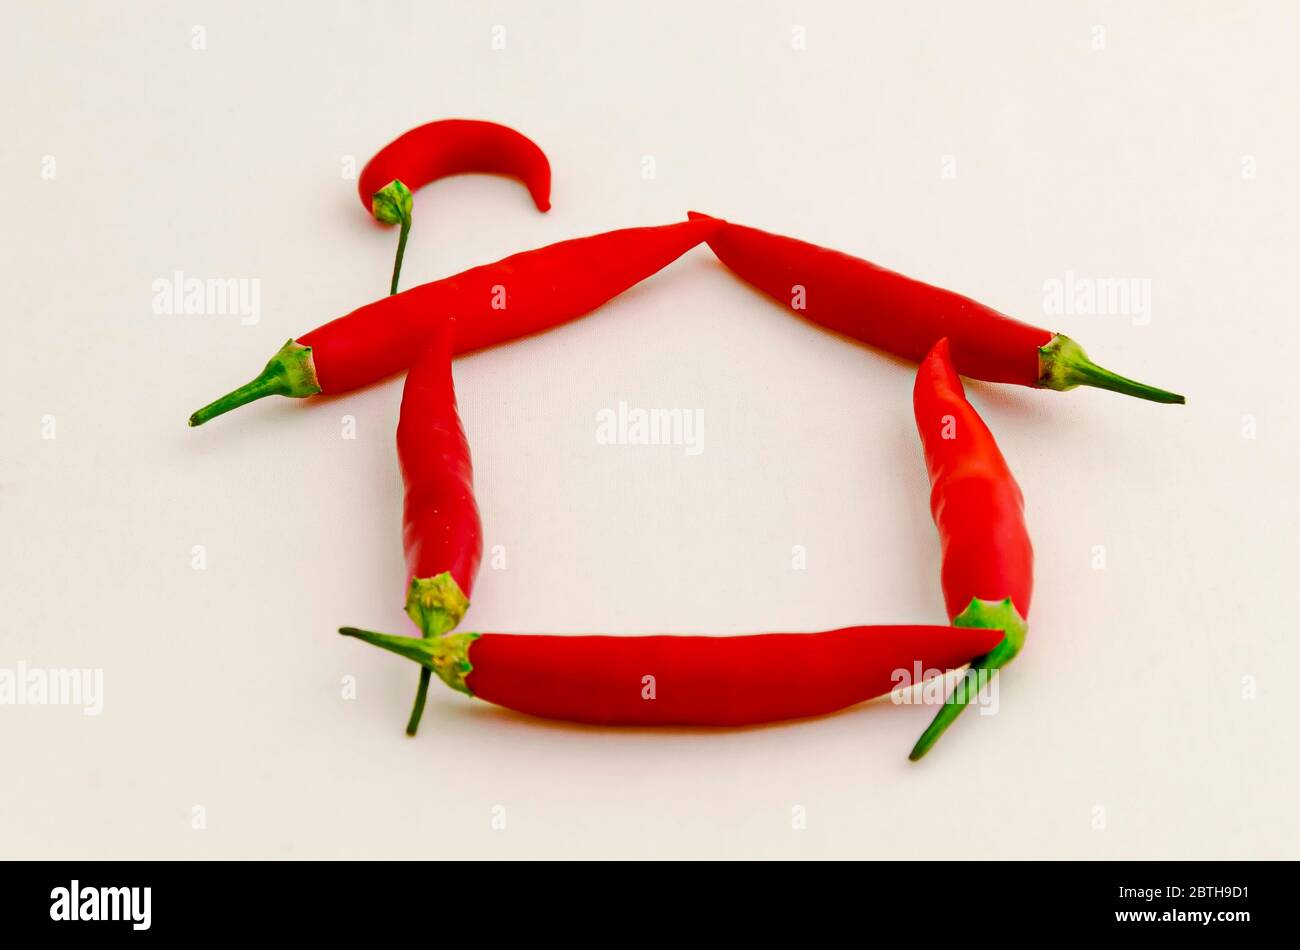 Sign or symbol House, made from the fruit of fresh chilli red pepper with a green stalk, Sofia, Bulgaria Stock Photo